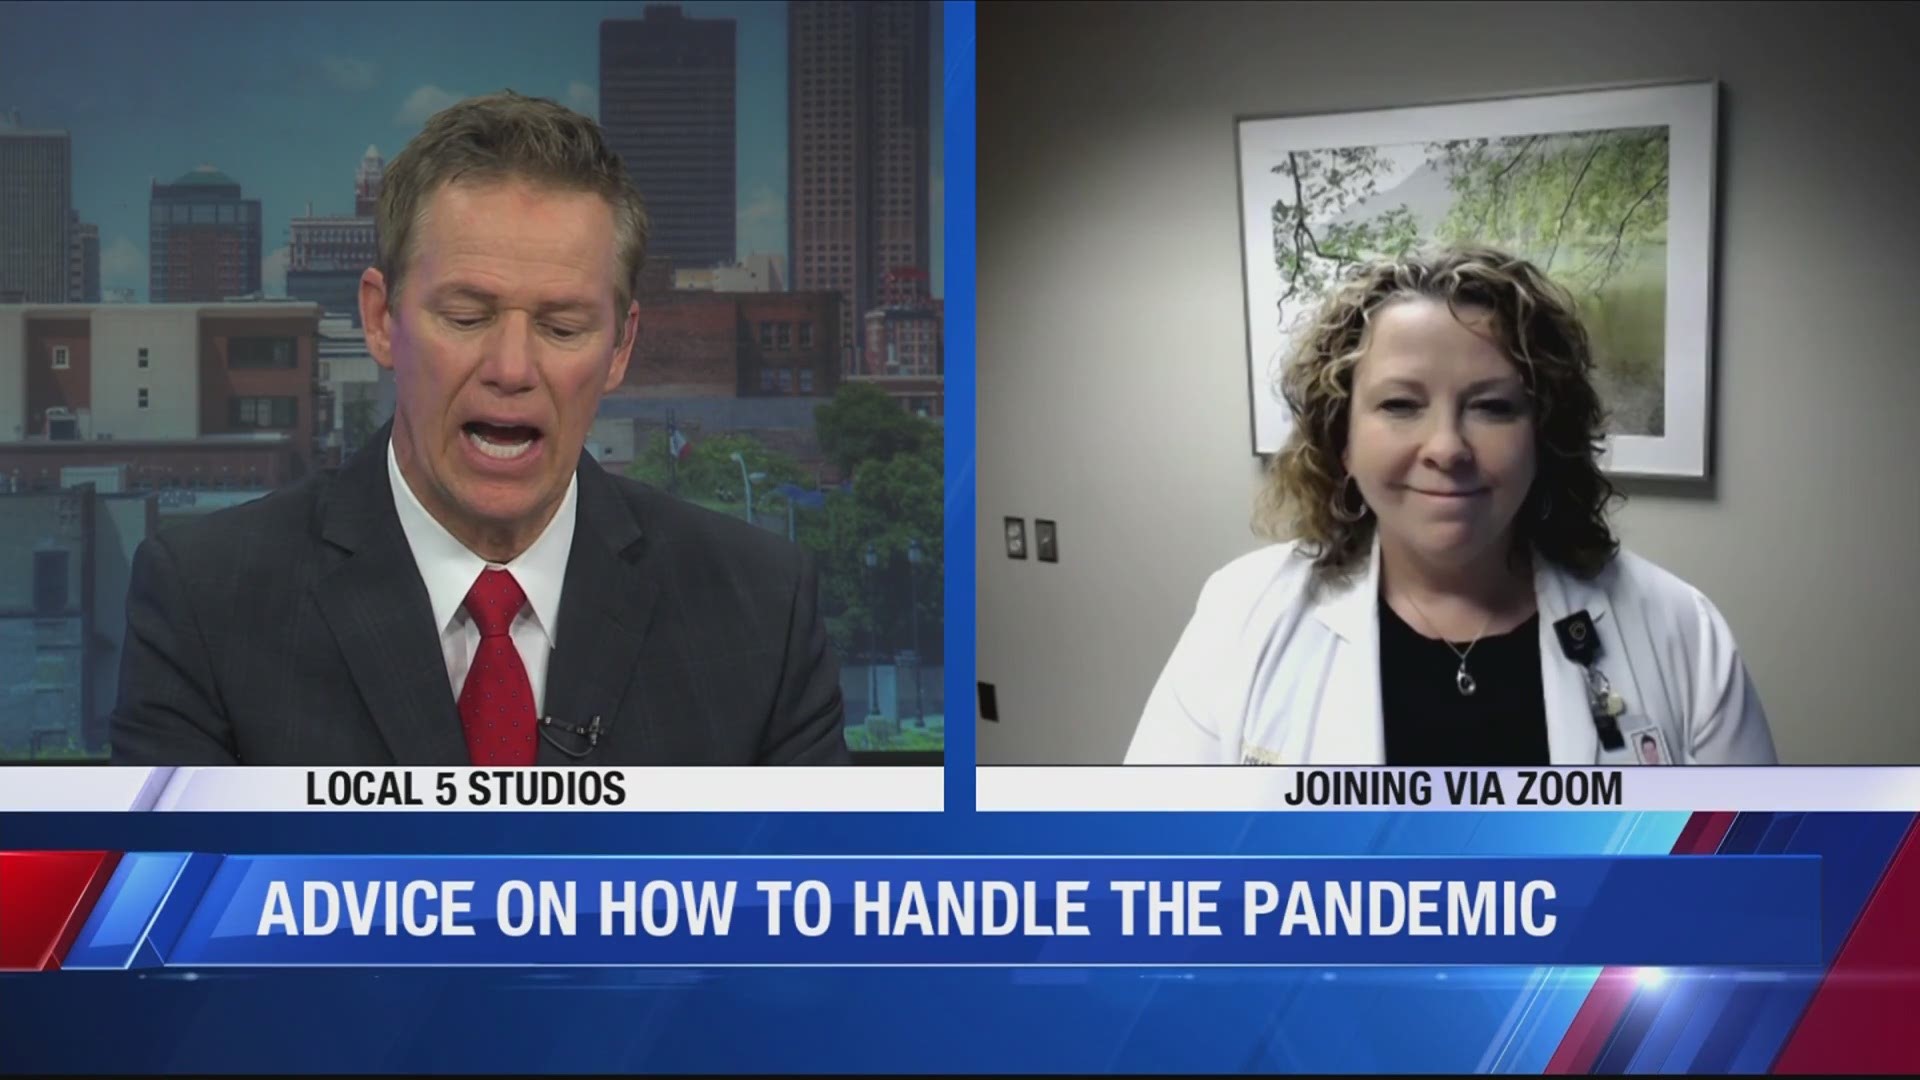 Iowa medical expert says you should use caution when mixing groups during the pandemic